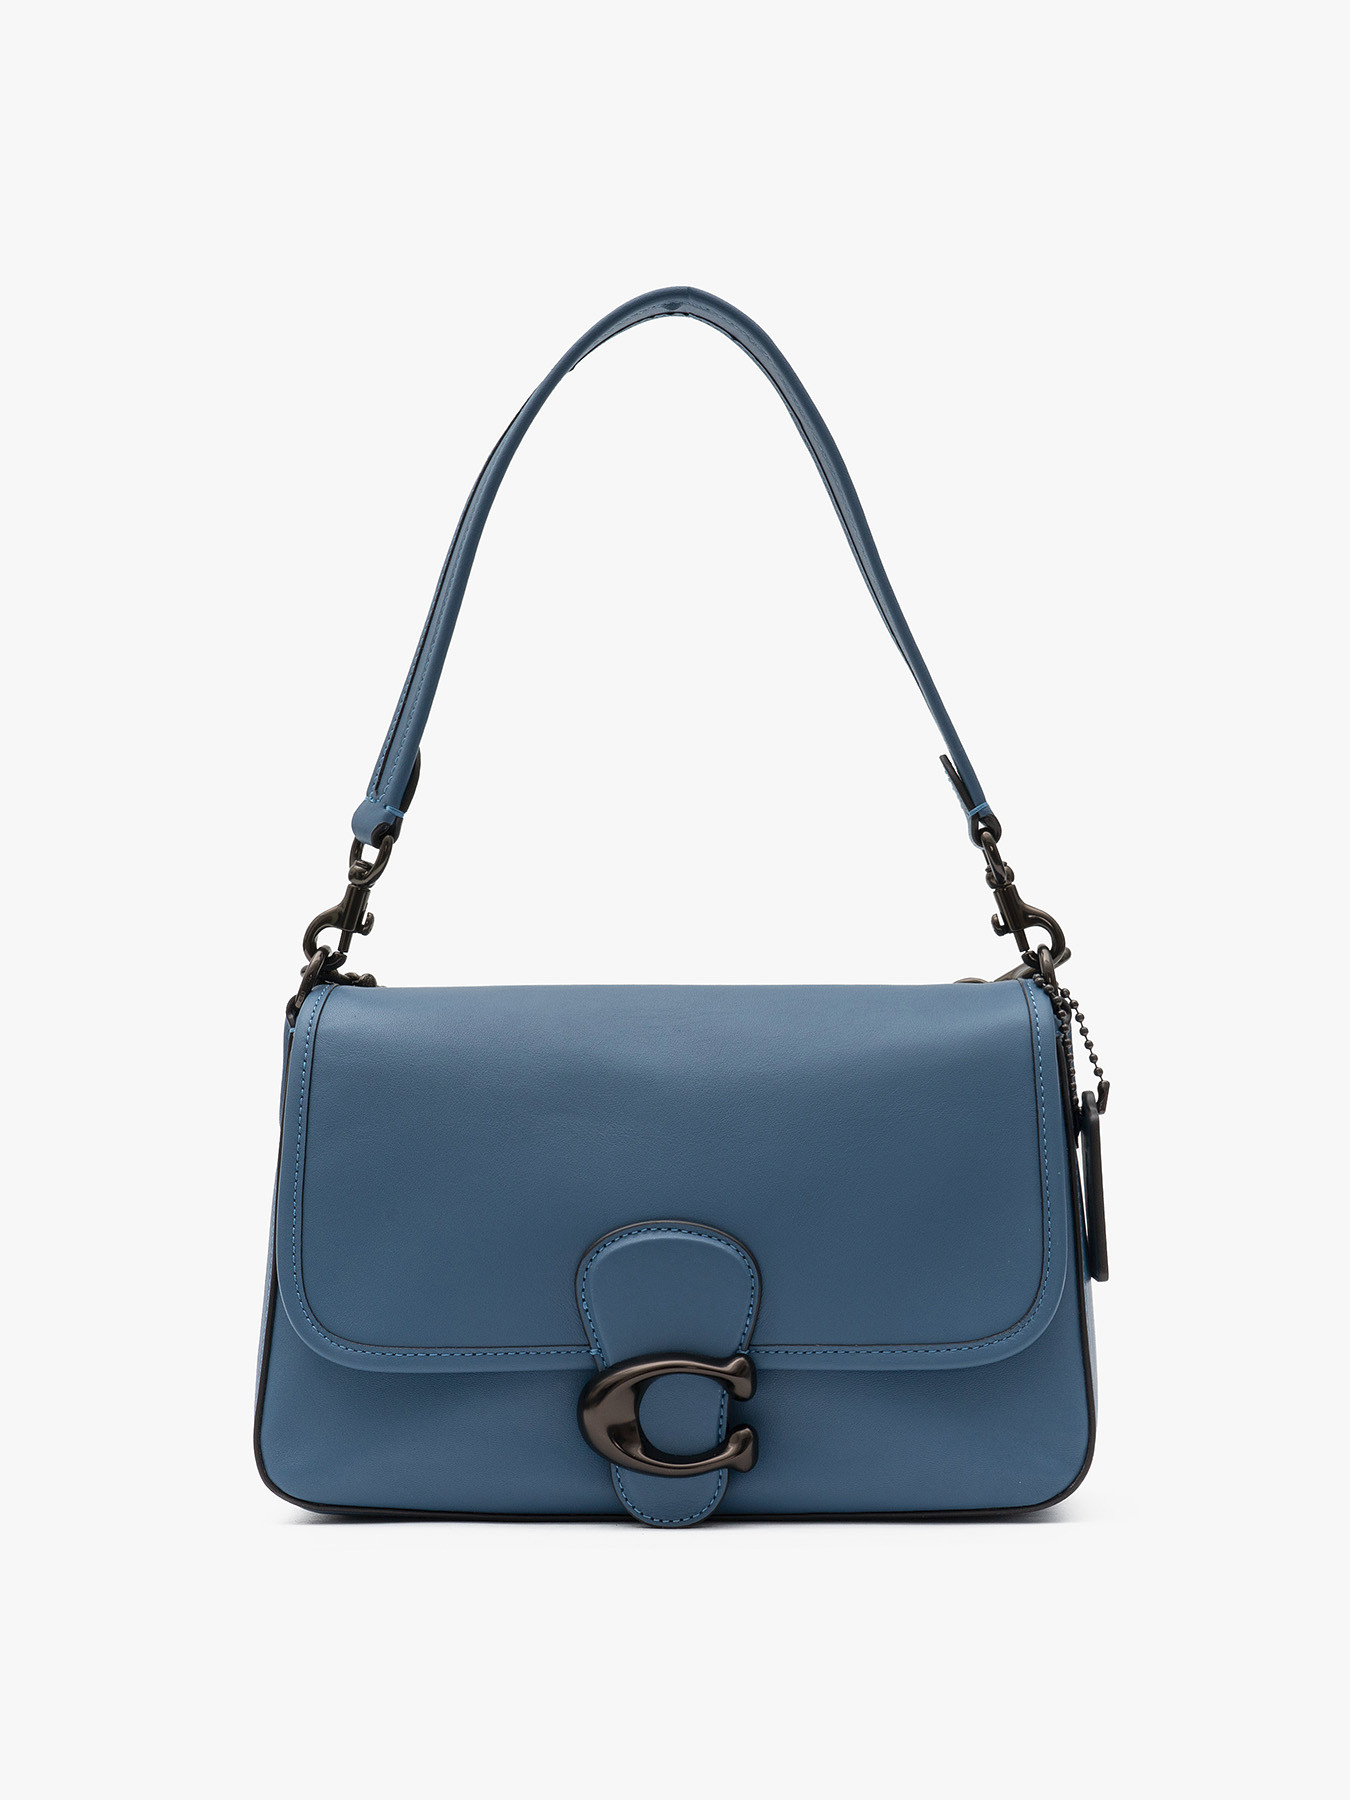 Coach Soft Calf Leather Tabby Shoulder Bag V5/washed Chambray | ModeSens